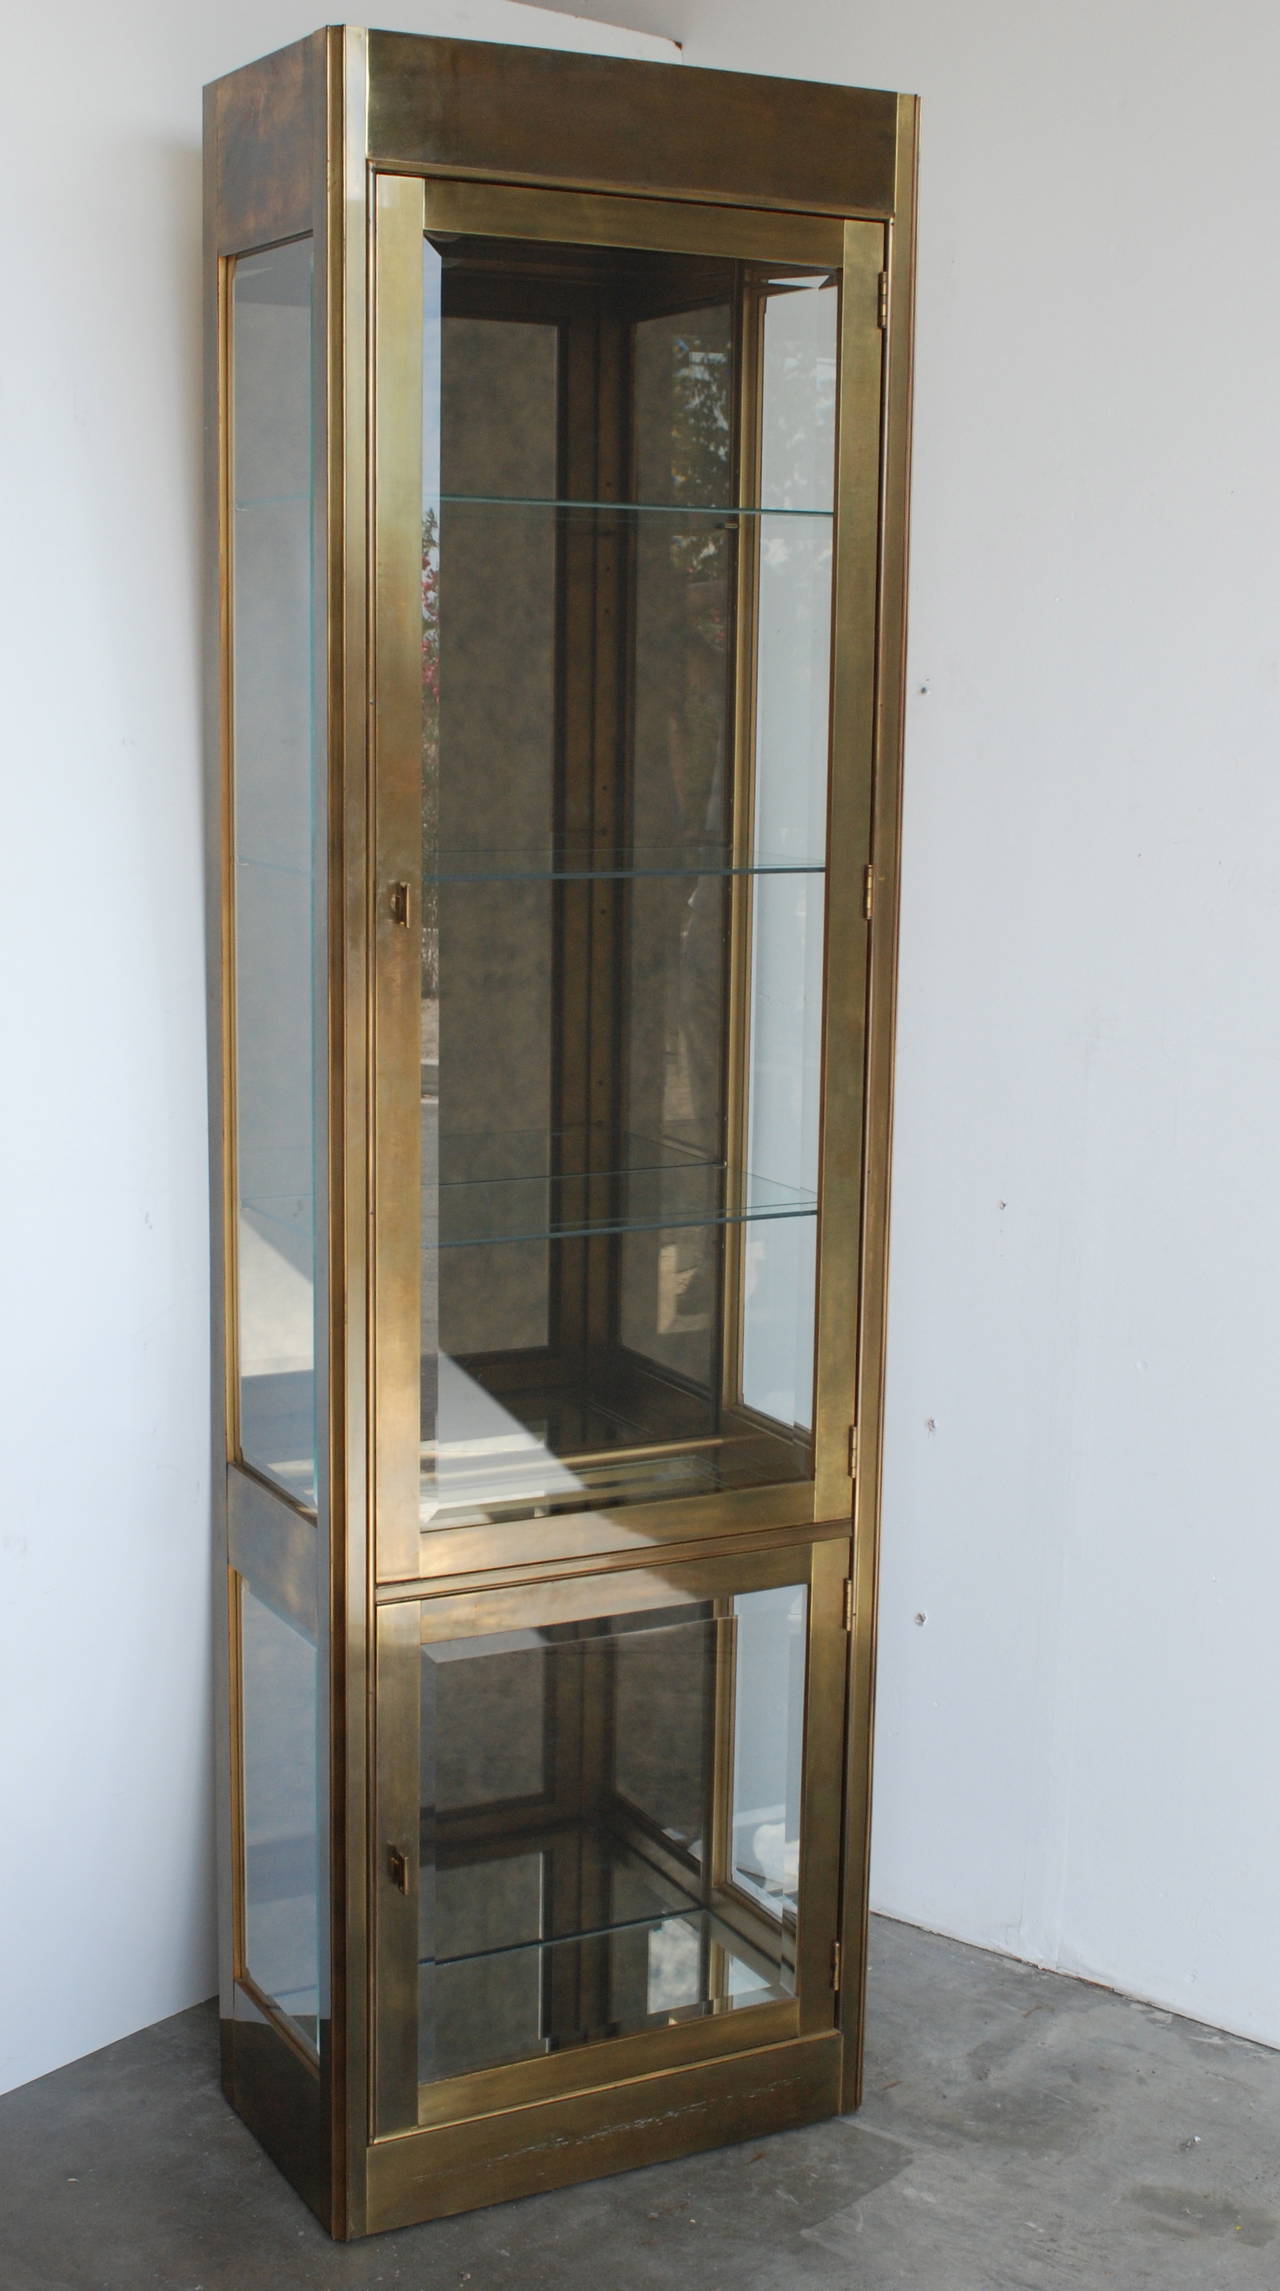 A lighted antique brass vitrine made by Mastercraft. There are two doors fitted with beveled glass. The top section has three adjustable shelves. There is smoked antique mirrored backing and a mirror bottom. 
The 14 3/4